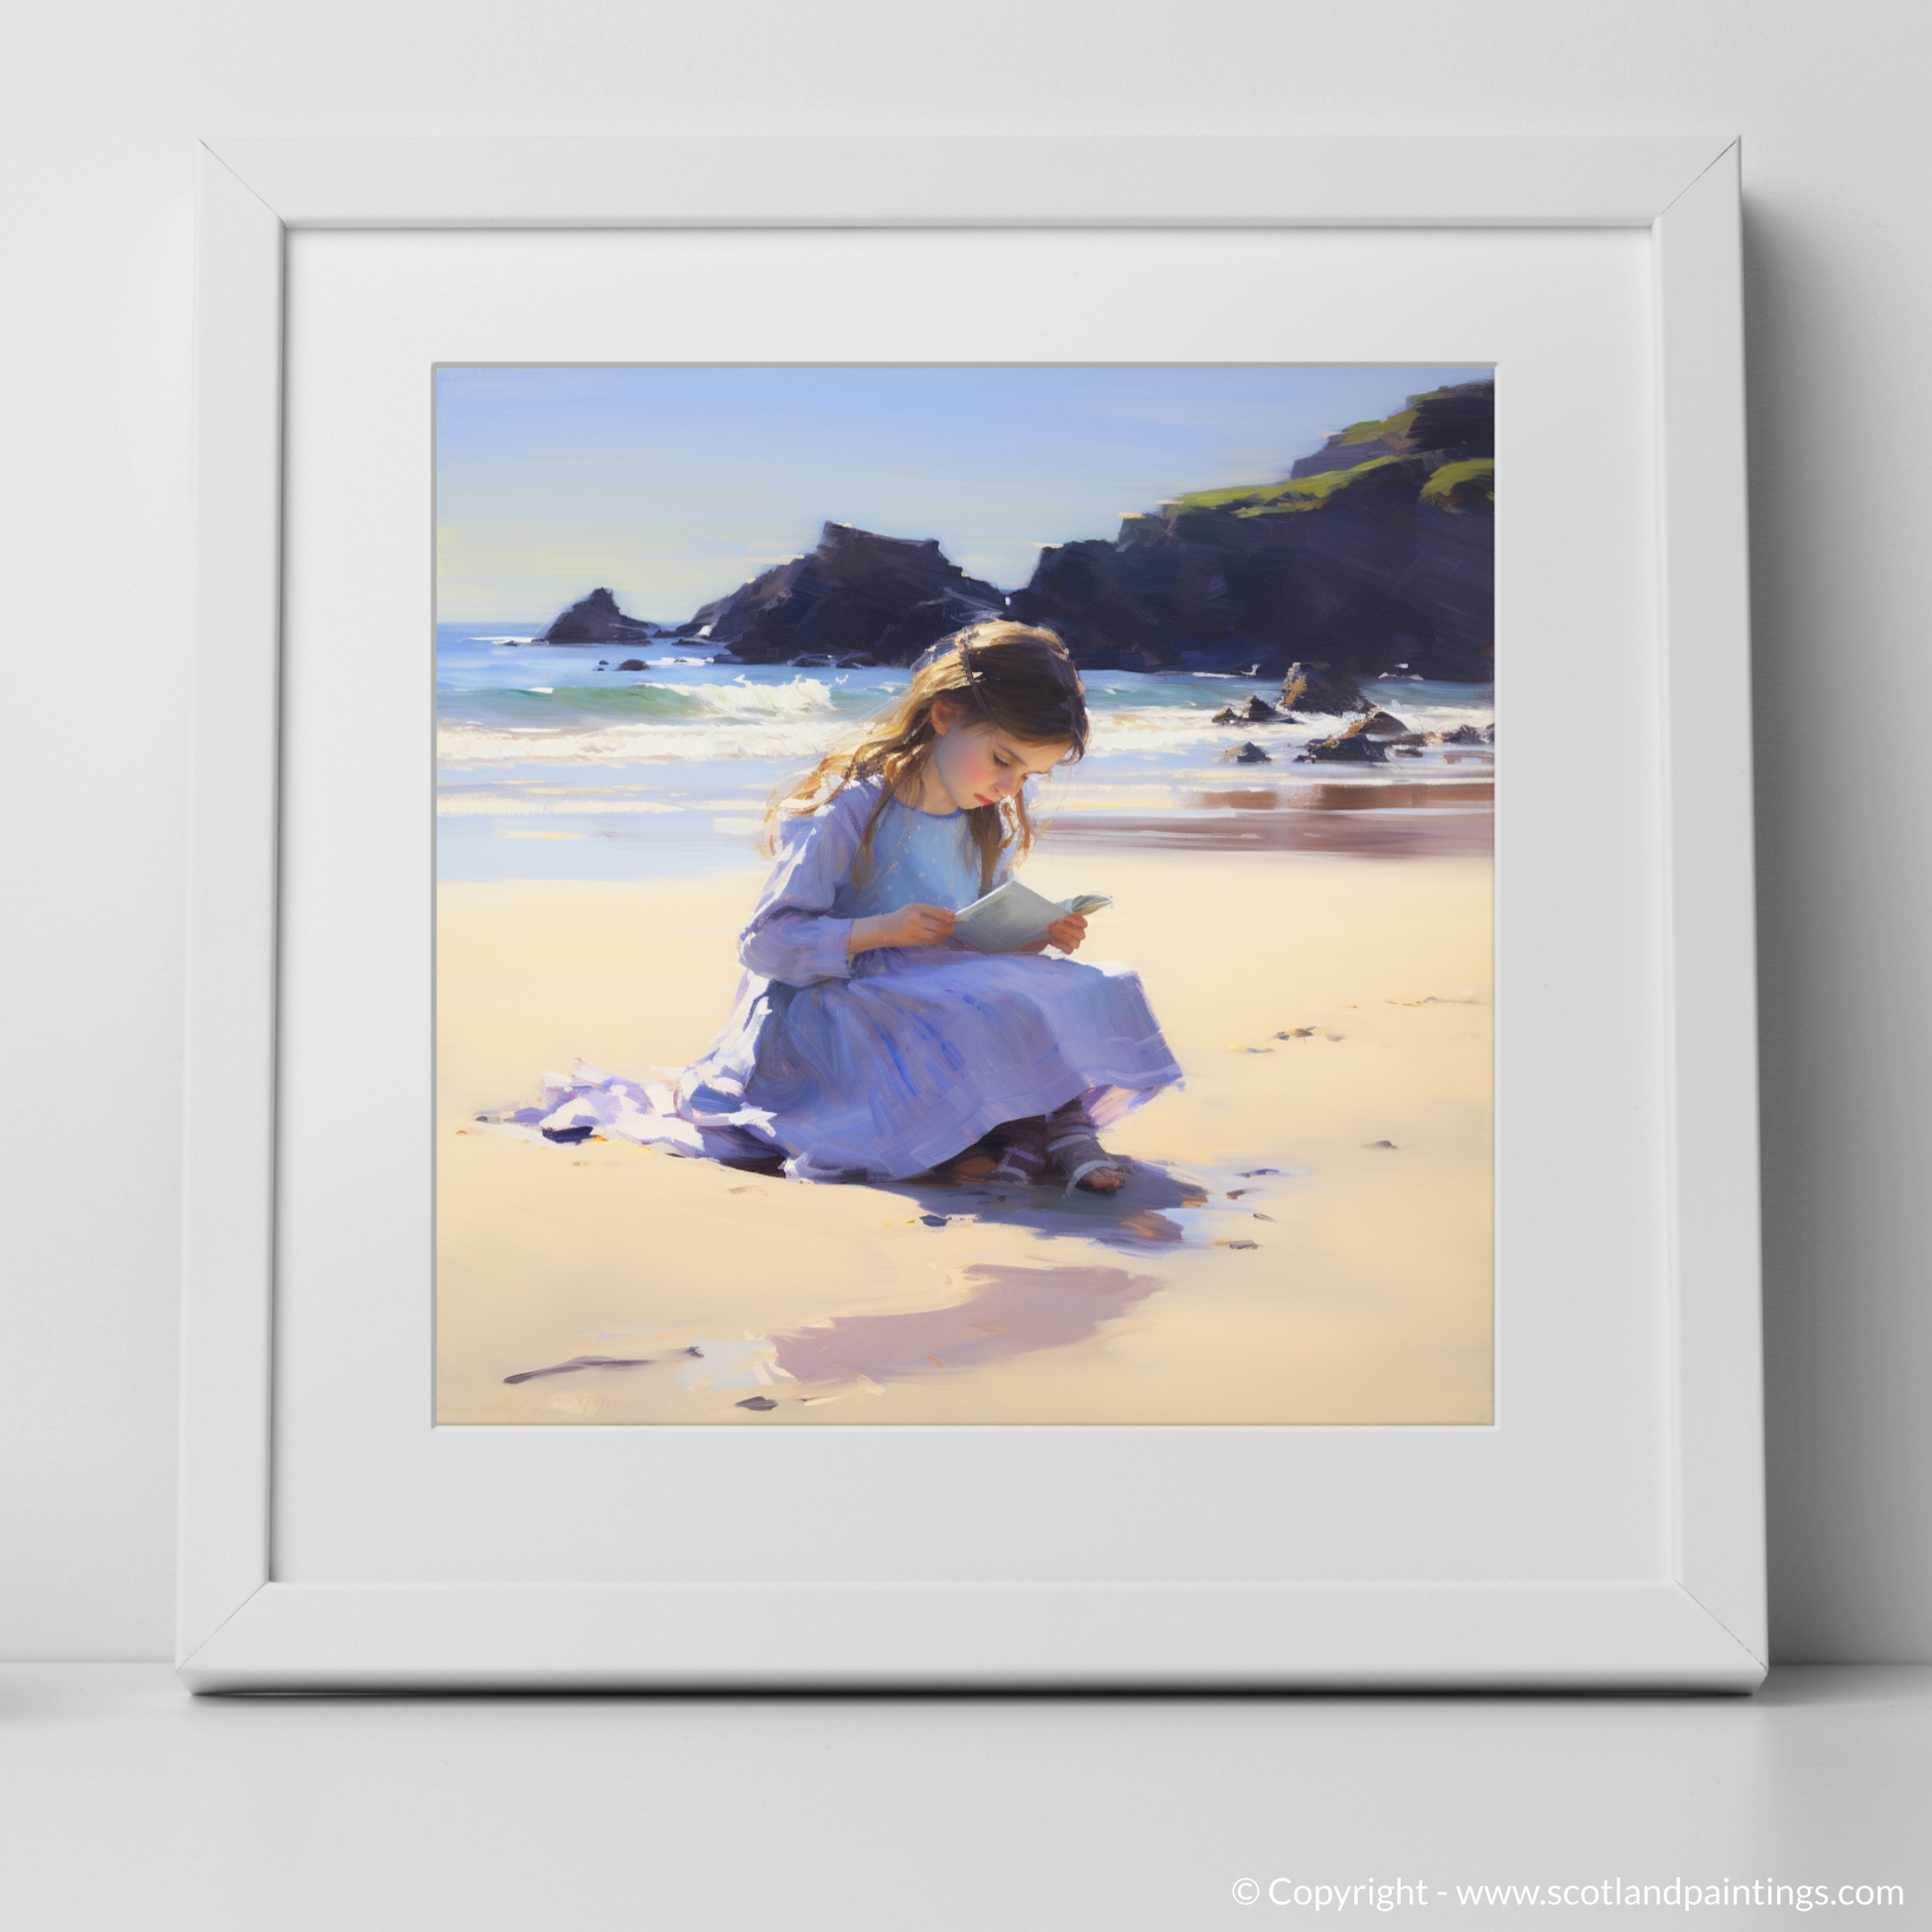 Art Print of A girl writing her name in the sand at Eyemouth Beach with a white frame